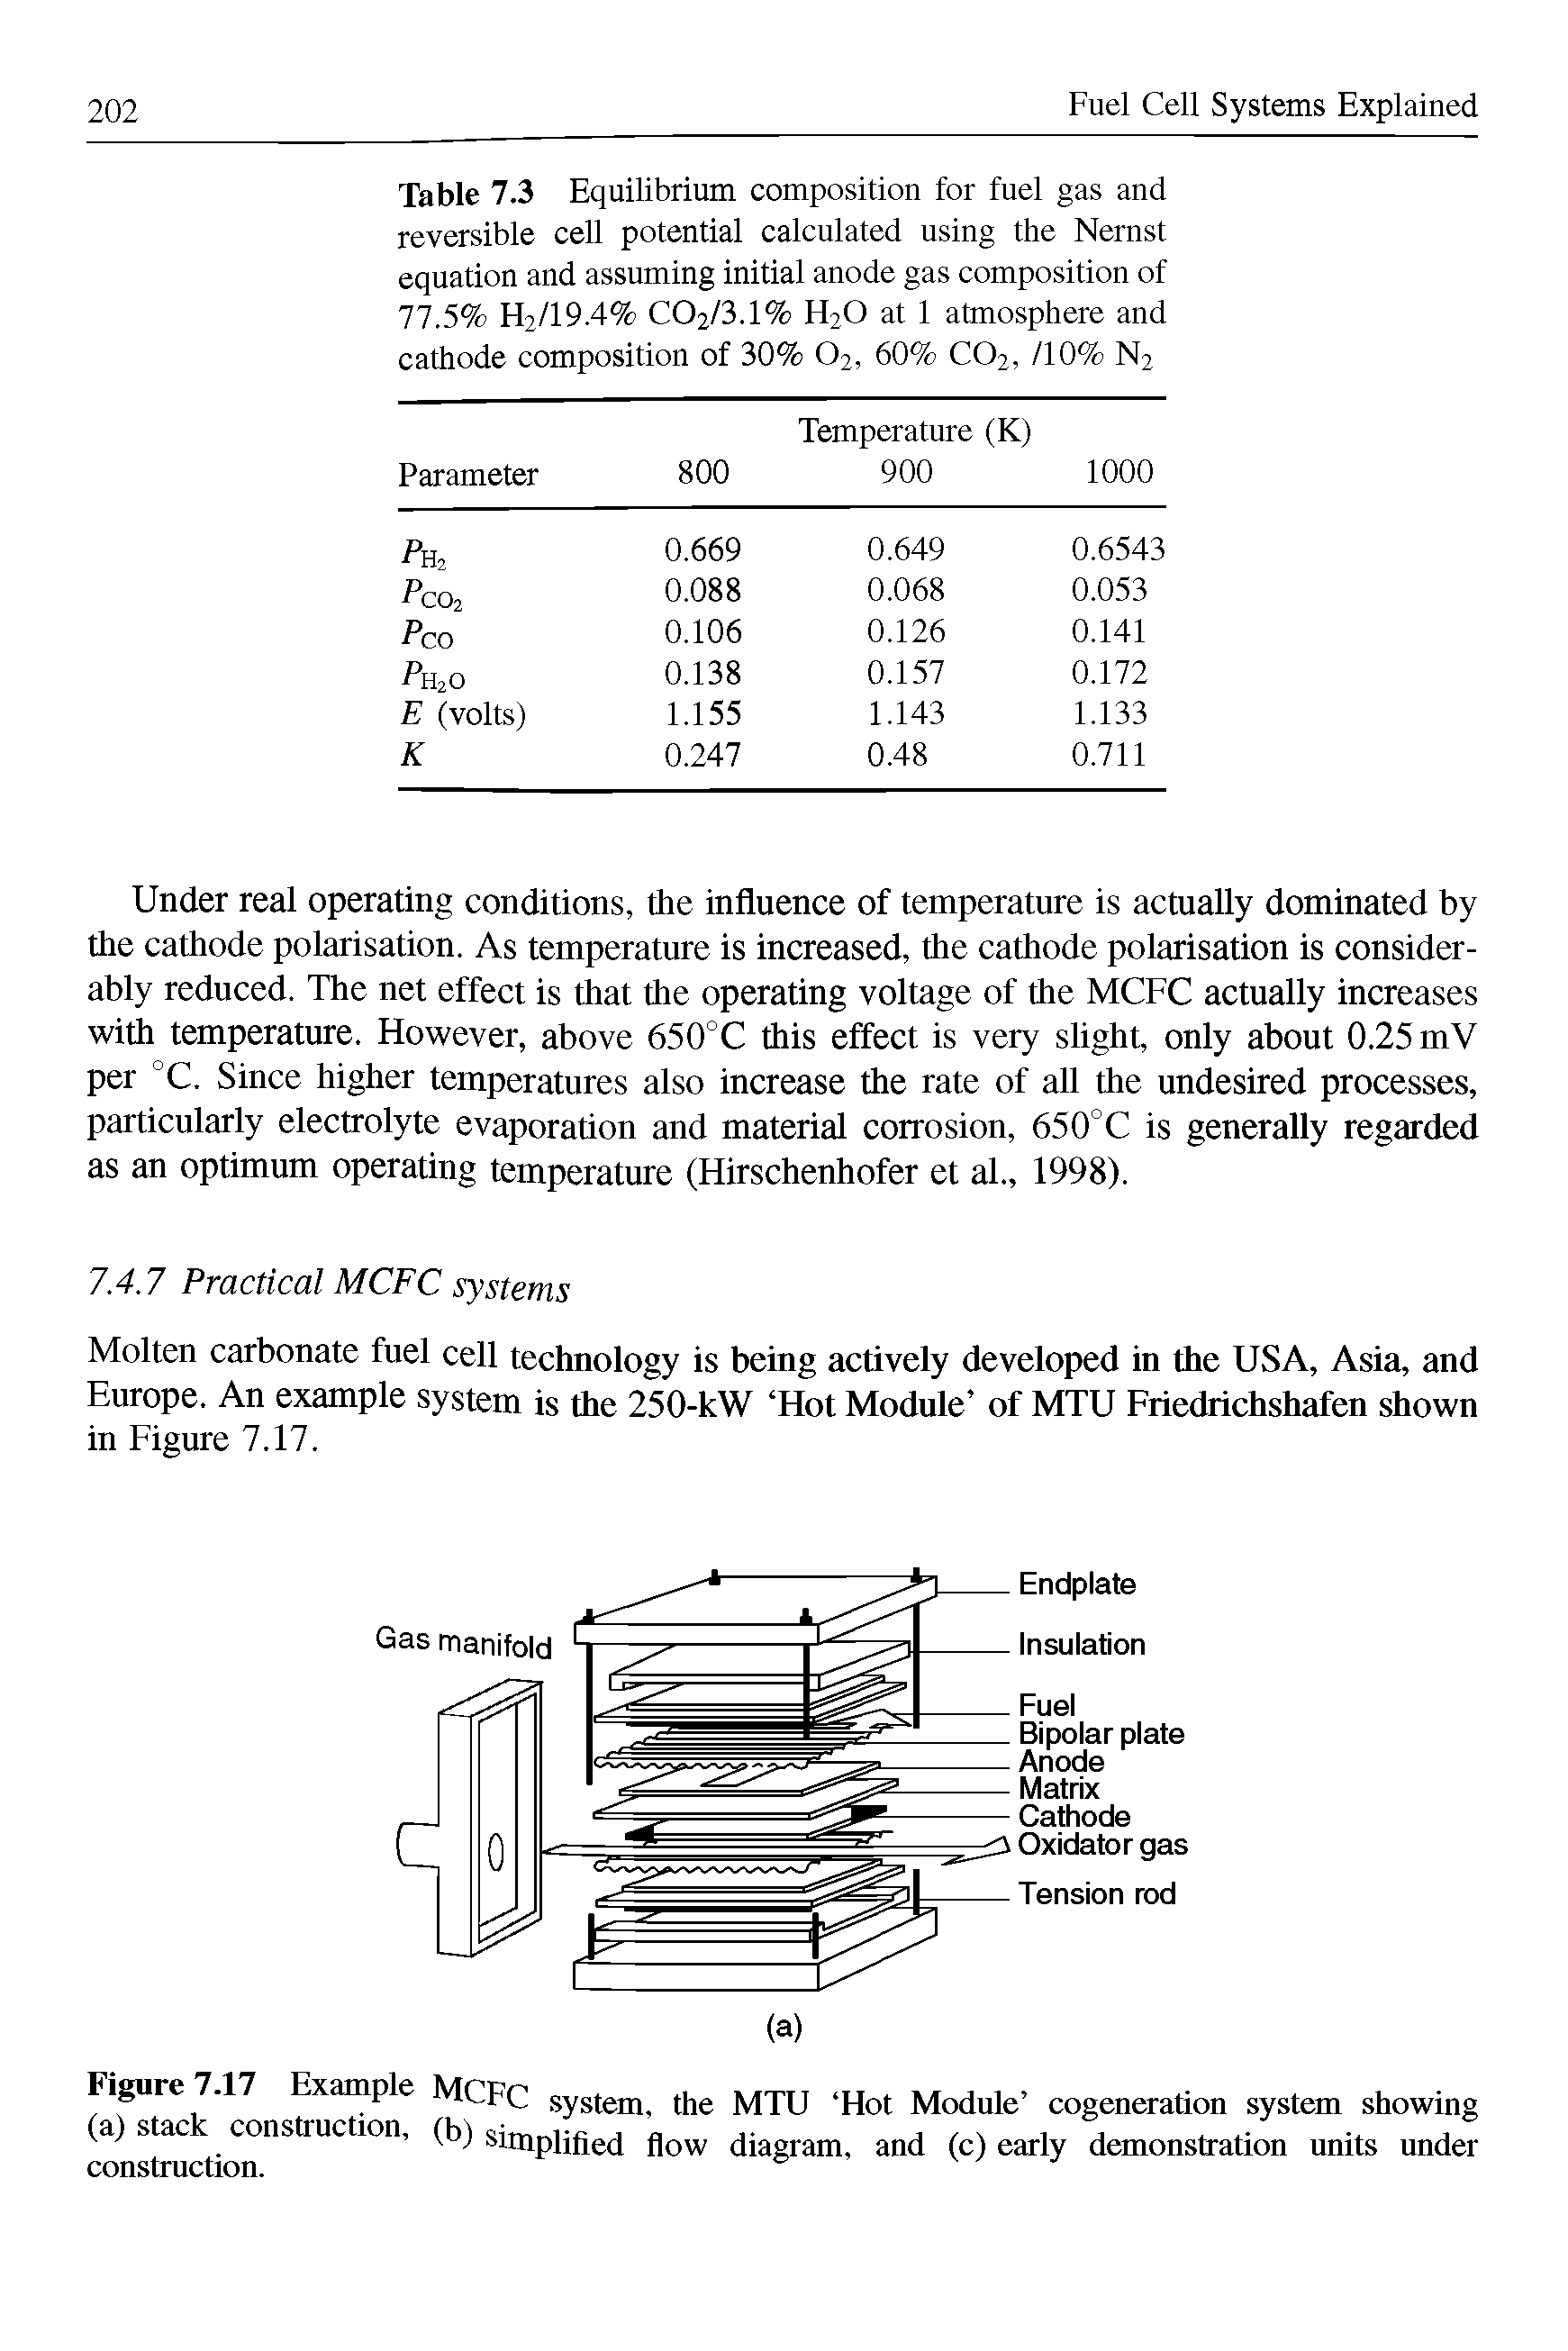 Table 7.3 Equilibrium composition for fuel gas and reversible cell potential calculated using the Nernst equation and assuming initial anode gas composition of 77.5% H2/19.4% C02/3.1% H2O at 1 atmosphere and cathode composition of 30% O2, 60% CO2, /10% N2...